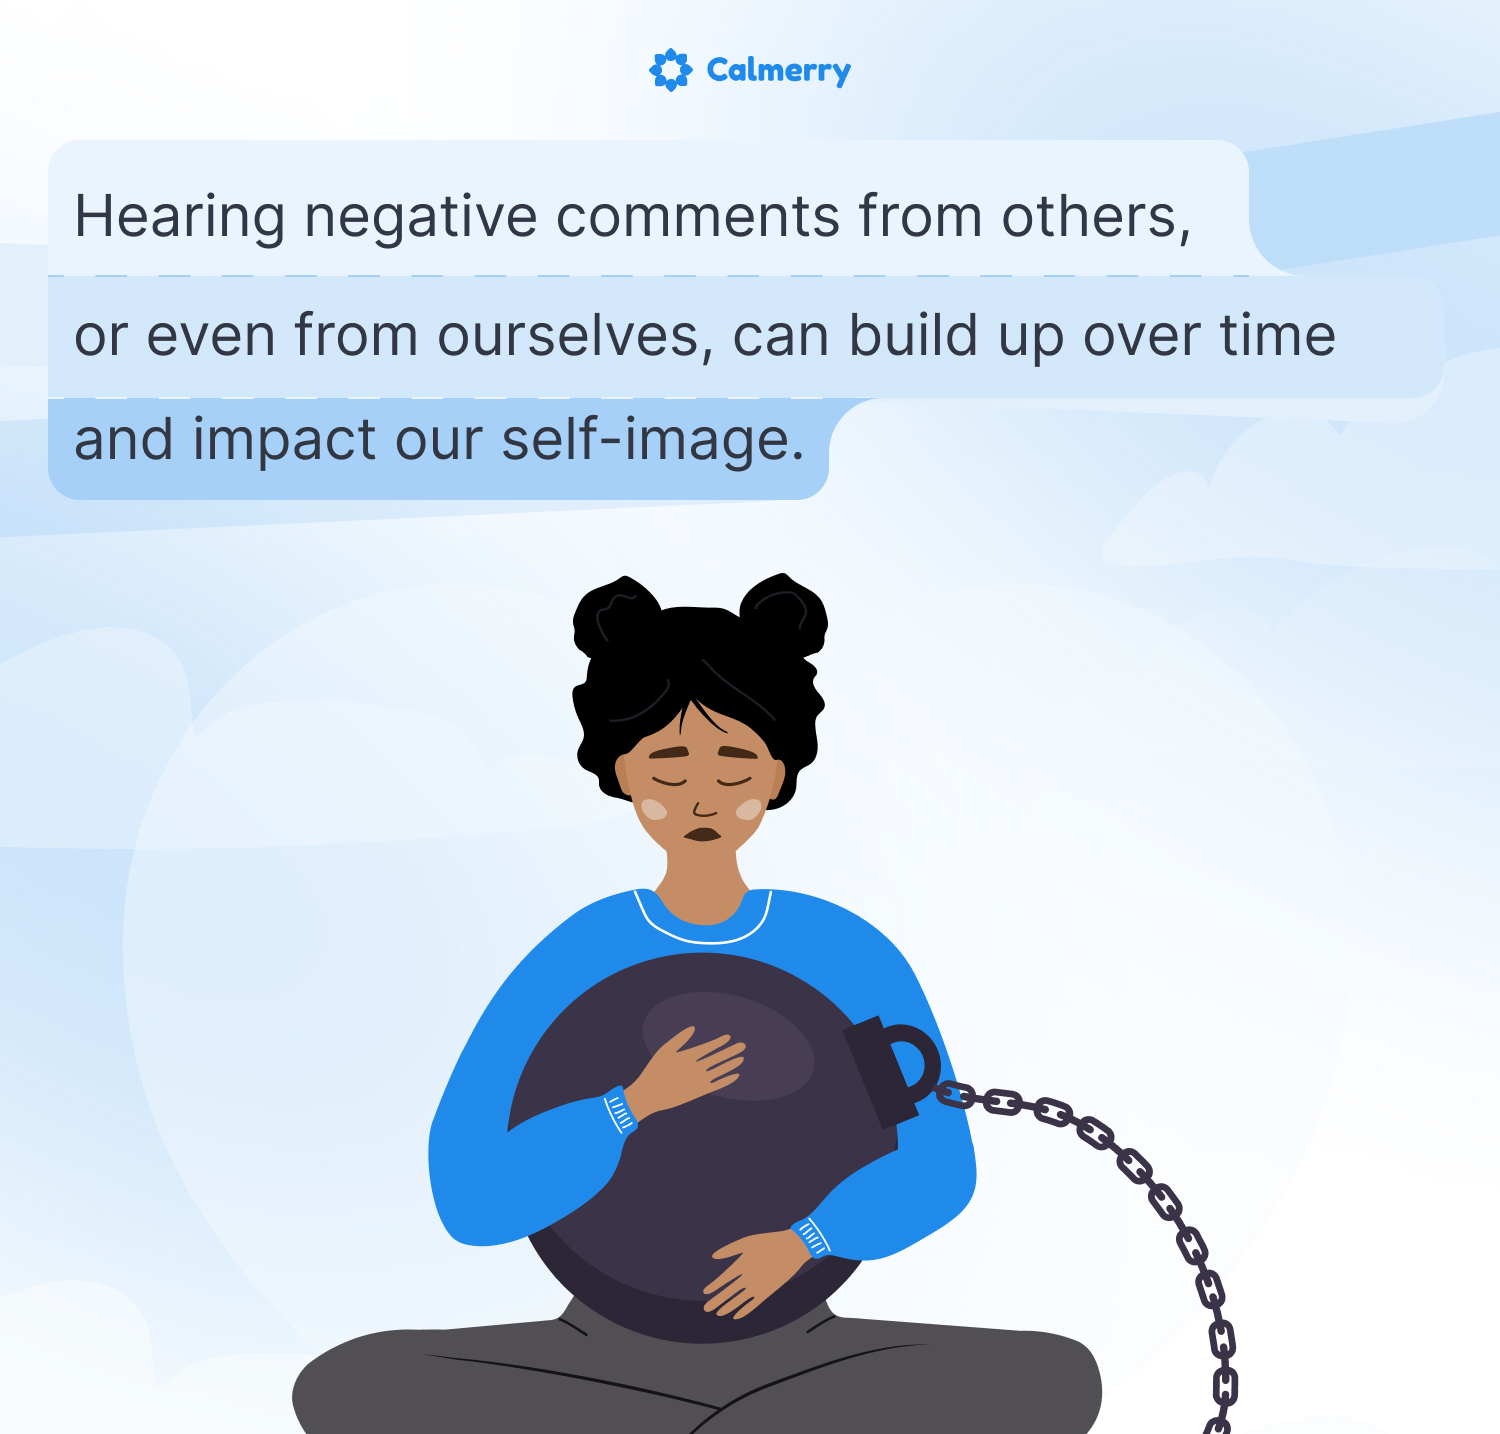 This image illustrates the impact of negative comments on self-image. It features the Calmerry logo at the top and a cartoon figure of a person with dark hair in buns, wearing a blue top. The person is sitting cross-legged, hugging a large, dark sphere that's chained to them, symbolizing the weight of negative self-perception.
Above the figure is text that reads: "Hearing negative comments from others, or even from ourselves, can build up over time and impact our self-image."
The person's closed eyes and downturned expression convey sadness or distress, emphasizing the emotional toll of negative self-image. The chained sphere represents how these negative thoughts can feel like a burden that's difficult to escape.
Overall, the image effectively communicates the psychological weight of accumulated negative comments and self-criticism on one's self-image and emotional well-being.